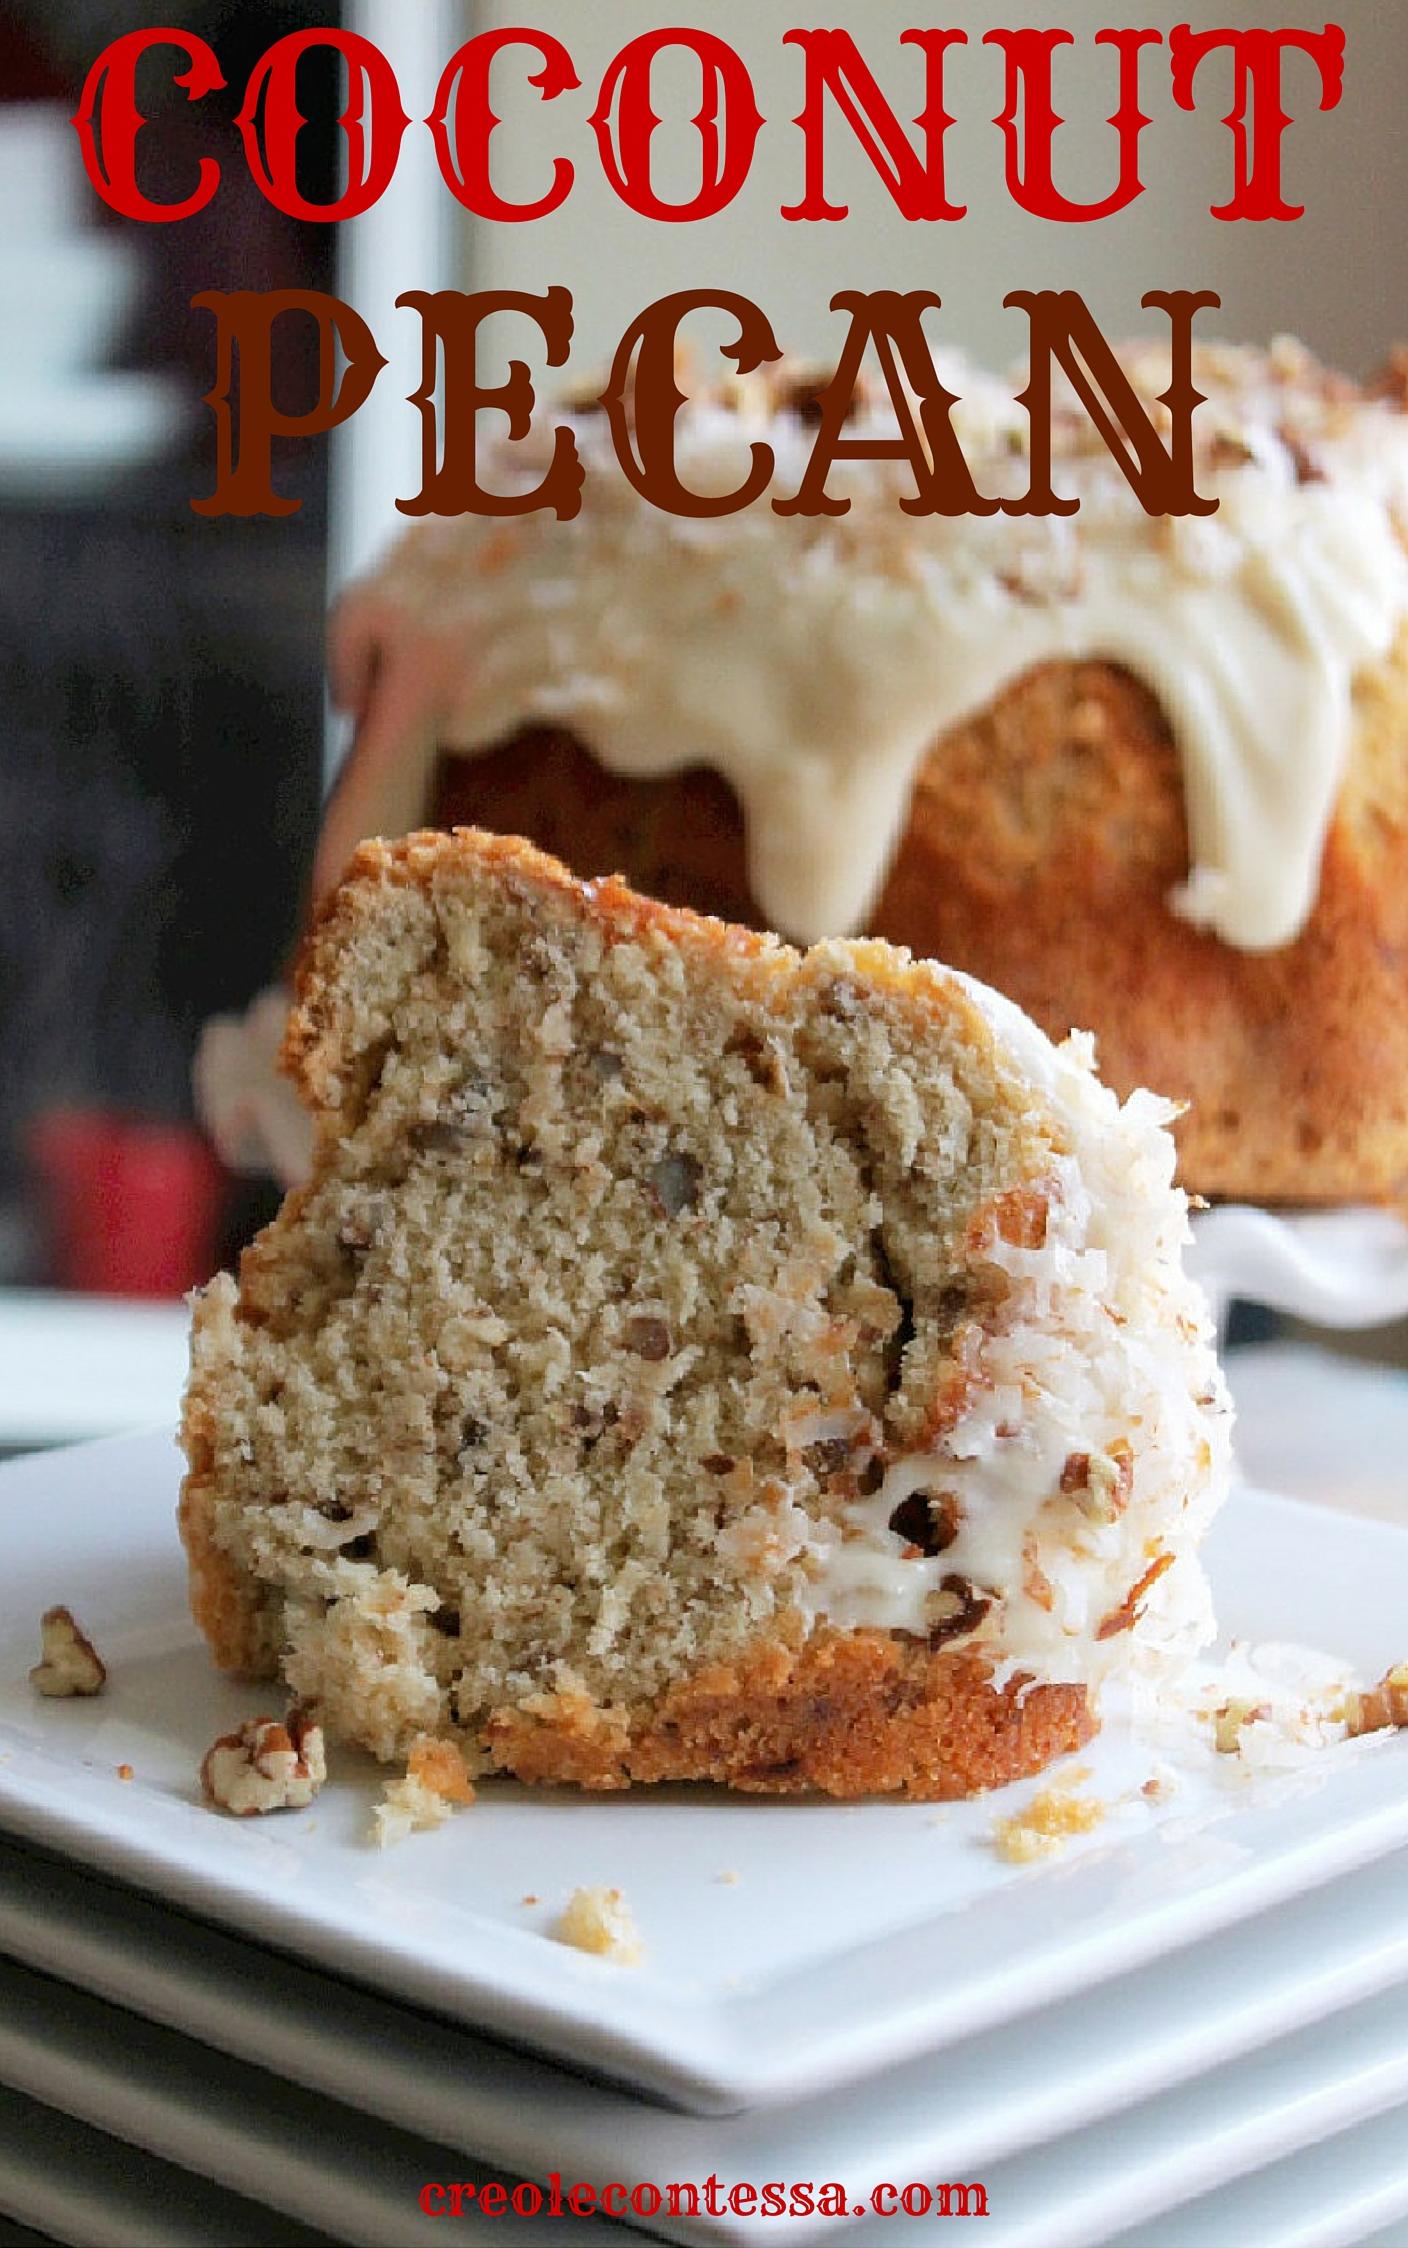  Coconut Pecan Pound Cake, the ultimate dessert for coconut lovers!